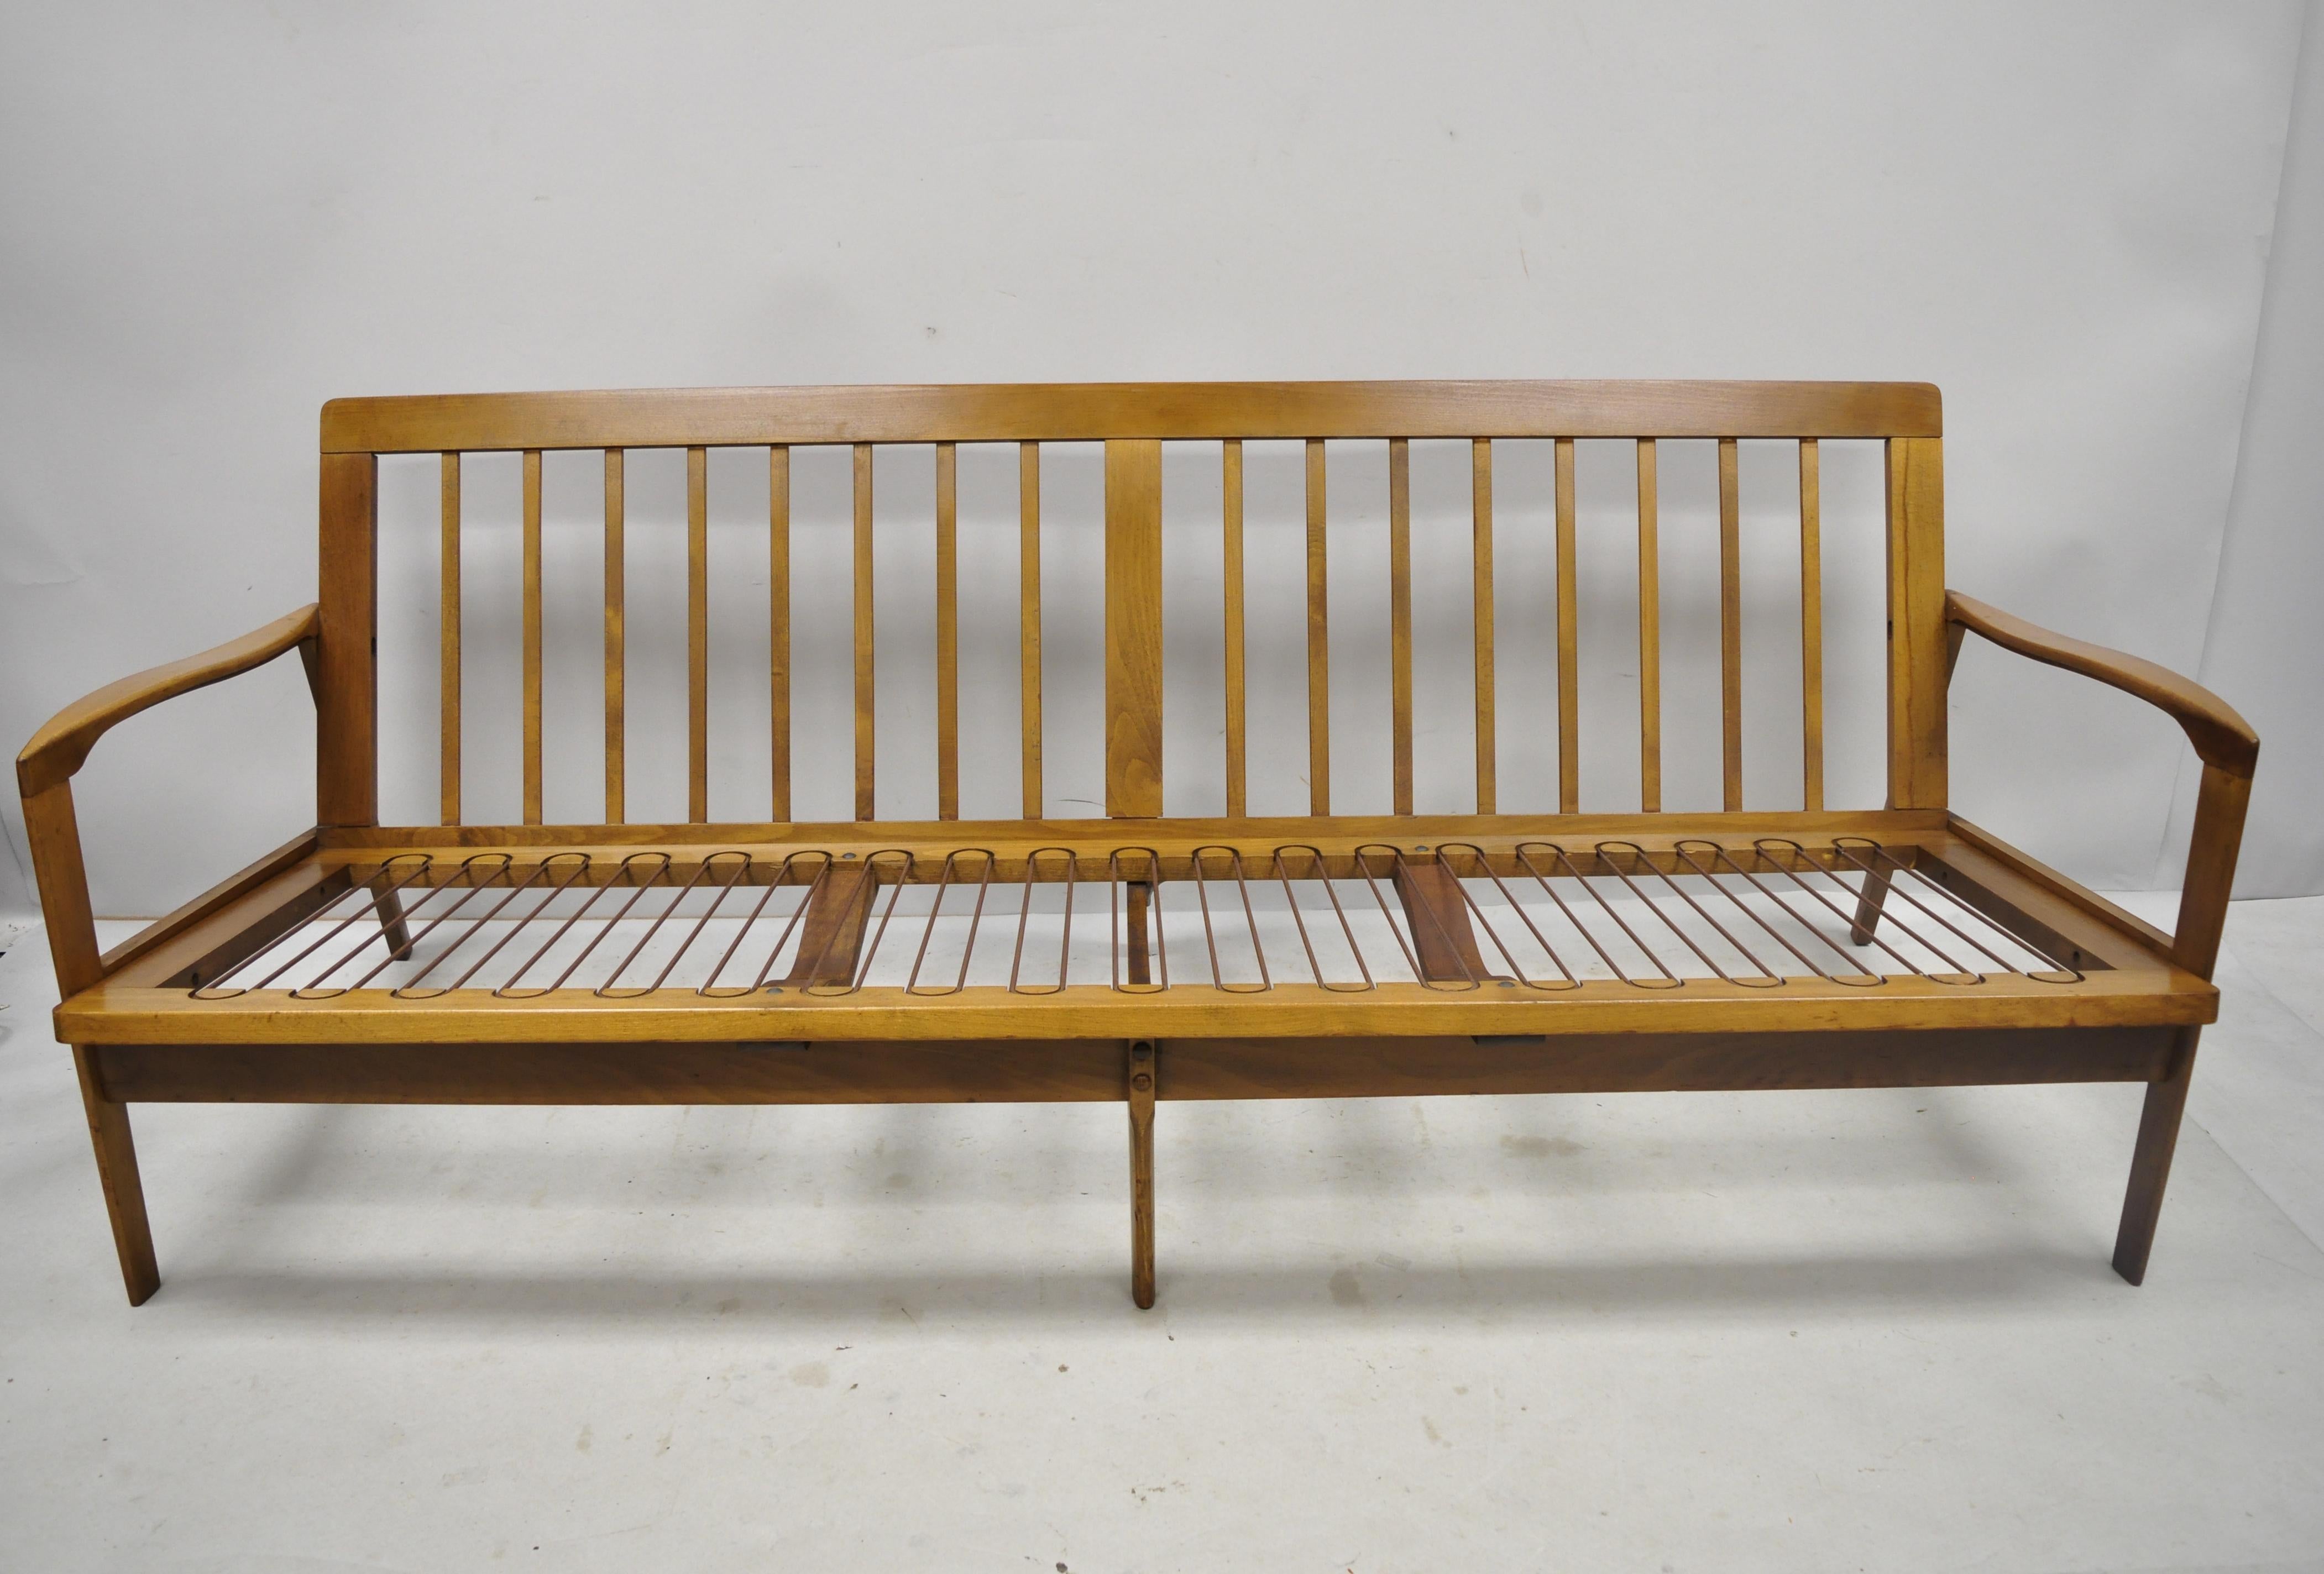 Vintage midcentury Danish modern sculpted walnut 3-seat spindle back sofa by Norco. Item includes loose cushions, solid wood frame, beautiful wood grain, original label, tapered legs,
circa mid-20th century. Measurements: 29